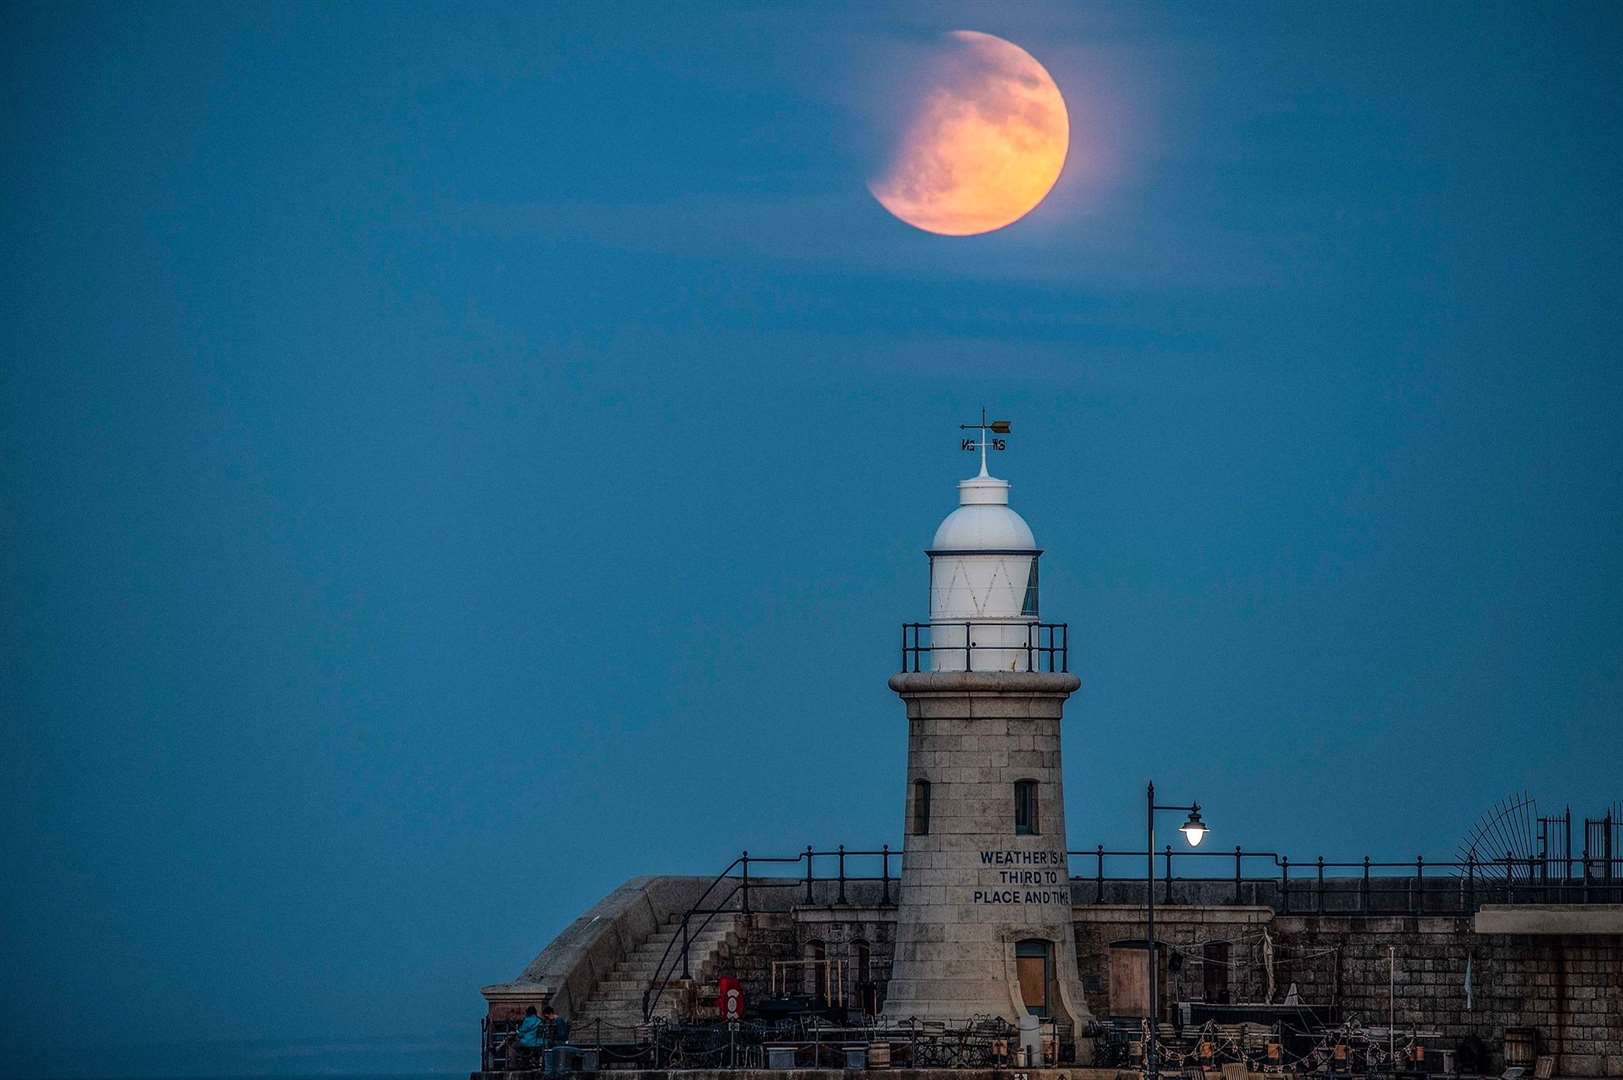 The eclipse over Folkestone harbour. Picture credit: Dirk Seyfried (13924230)